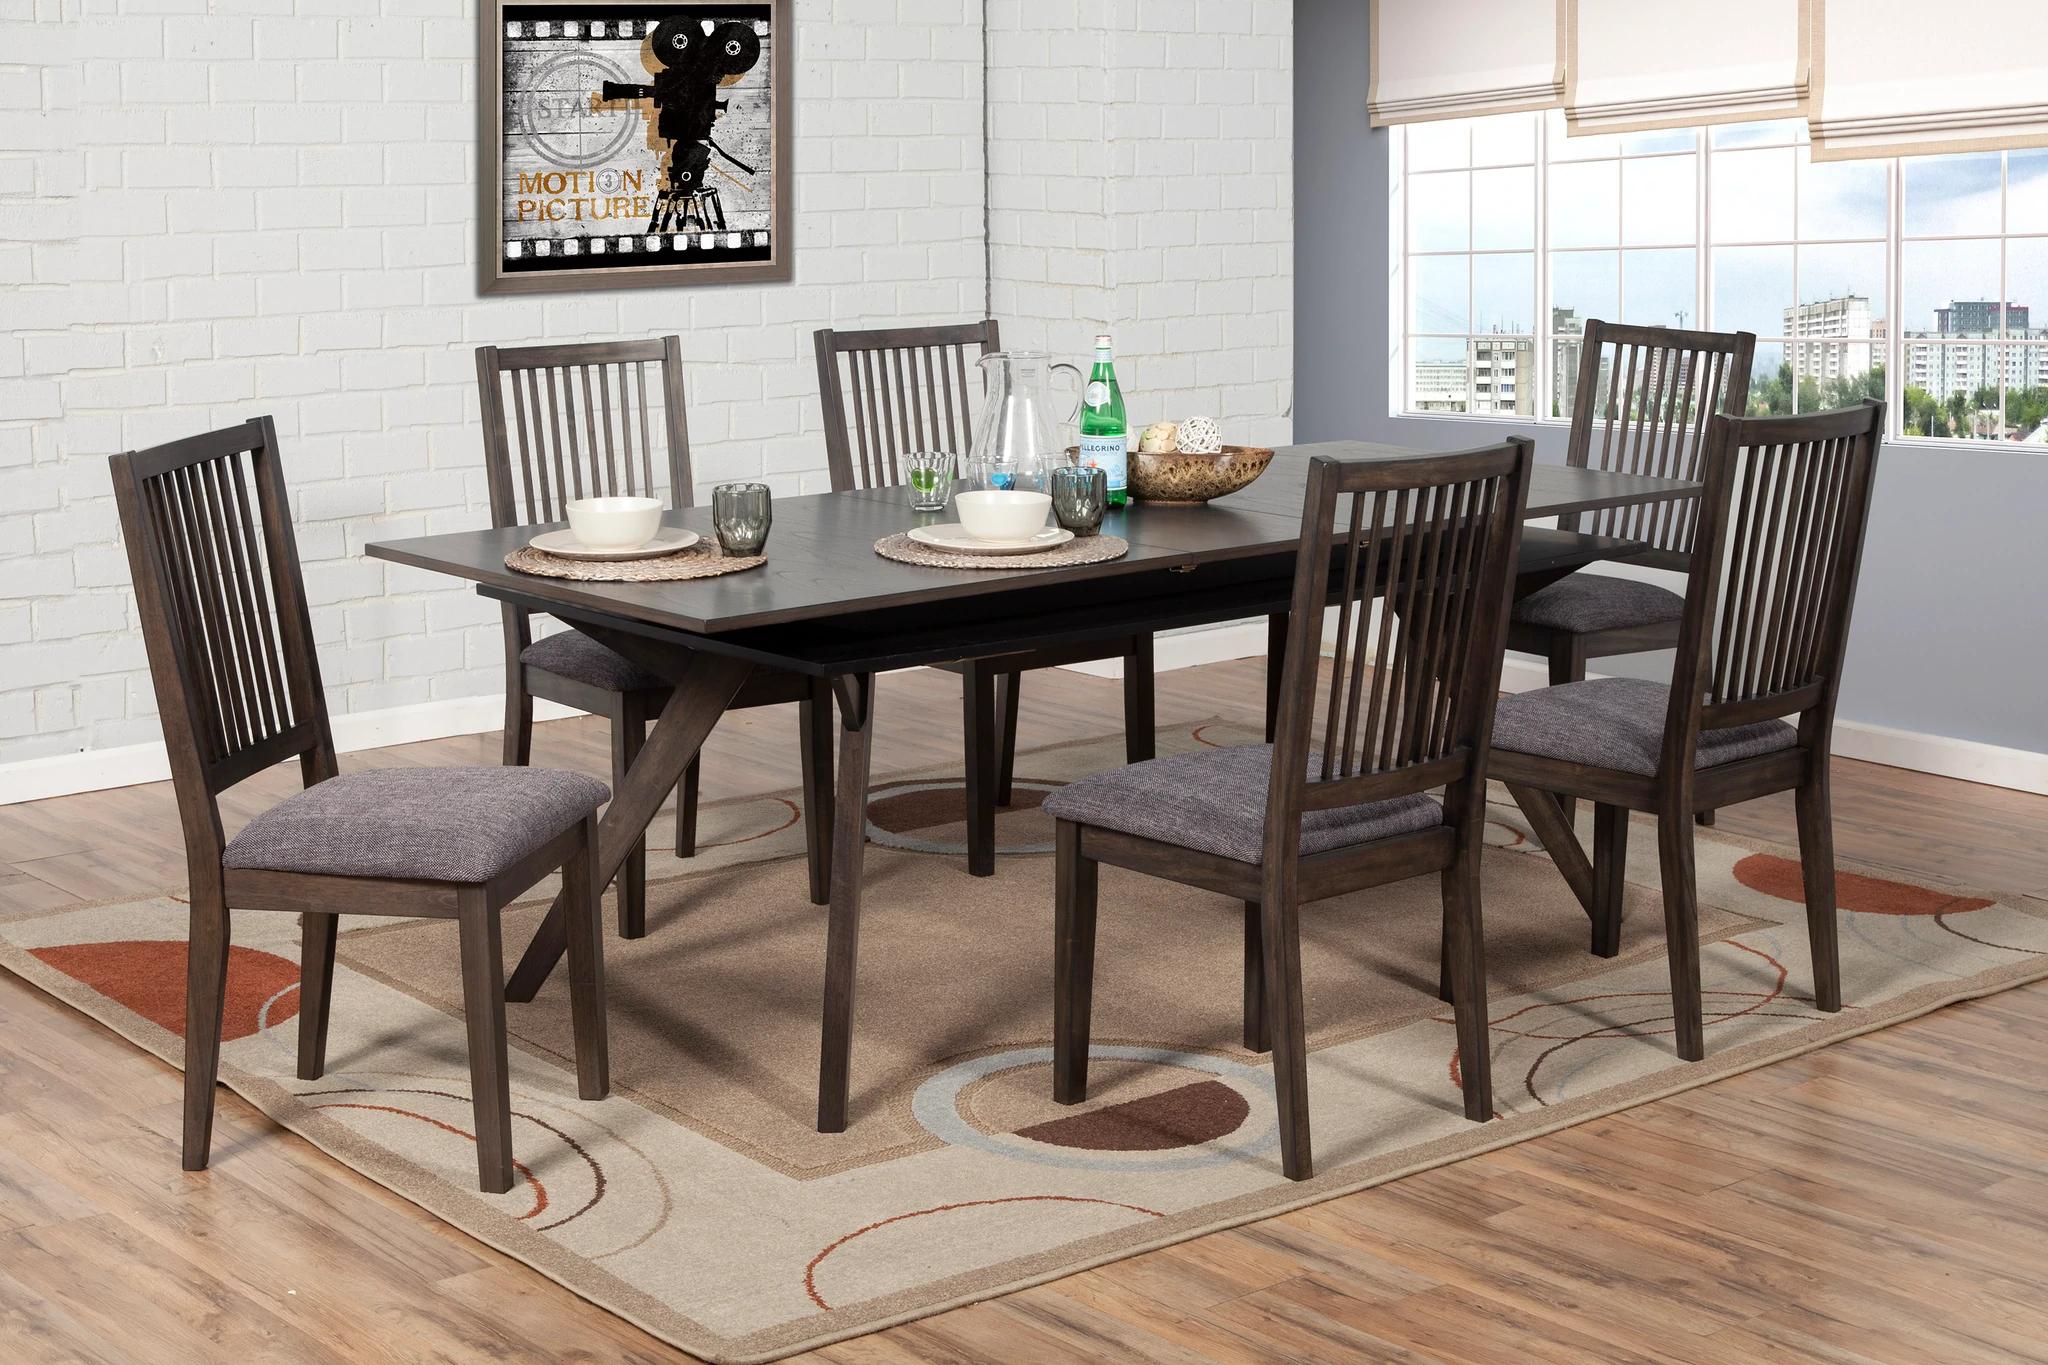 Casual, Transitional Dining Table Set LENNOX 5164-01-Set-7 in Tobacco, Gray Fabric